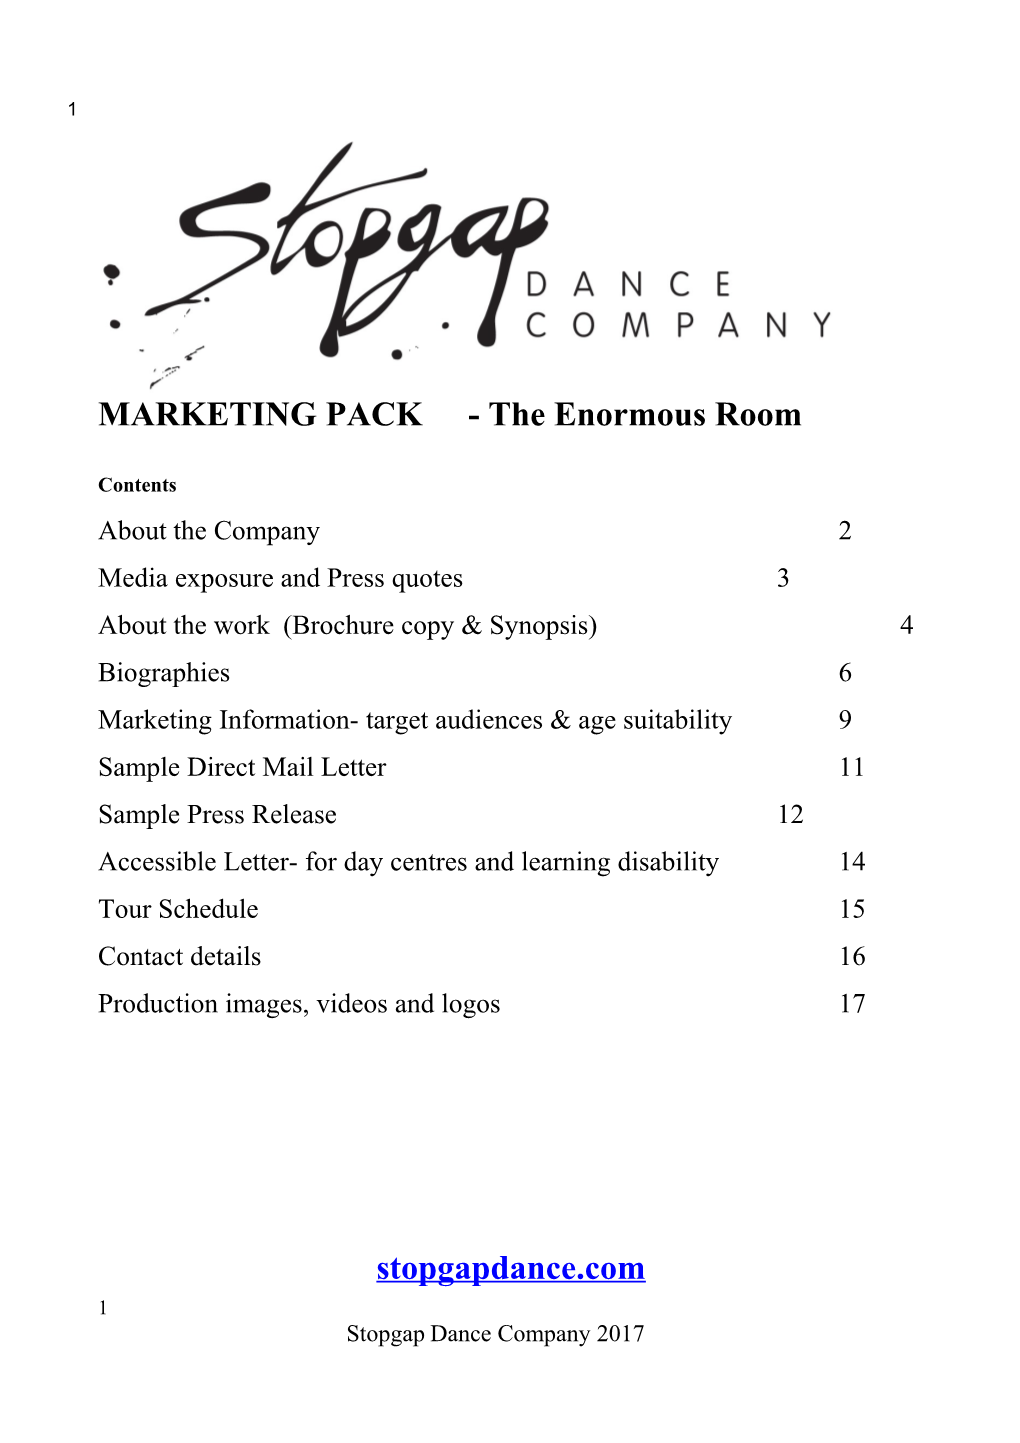 MARKETING PACK - the Enormous Room